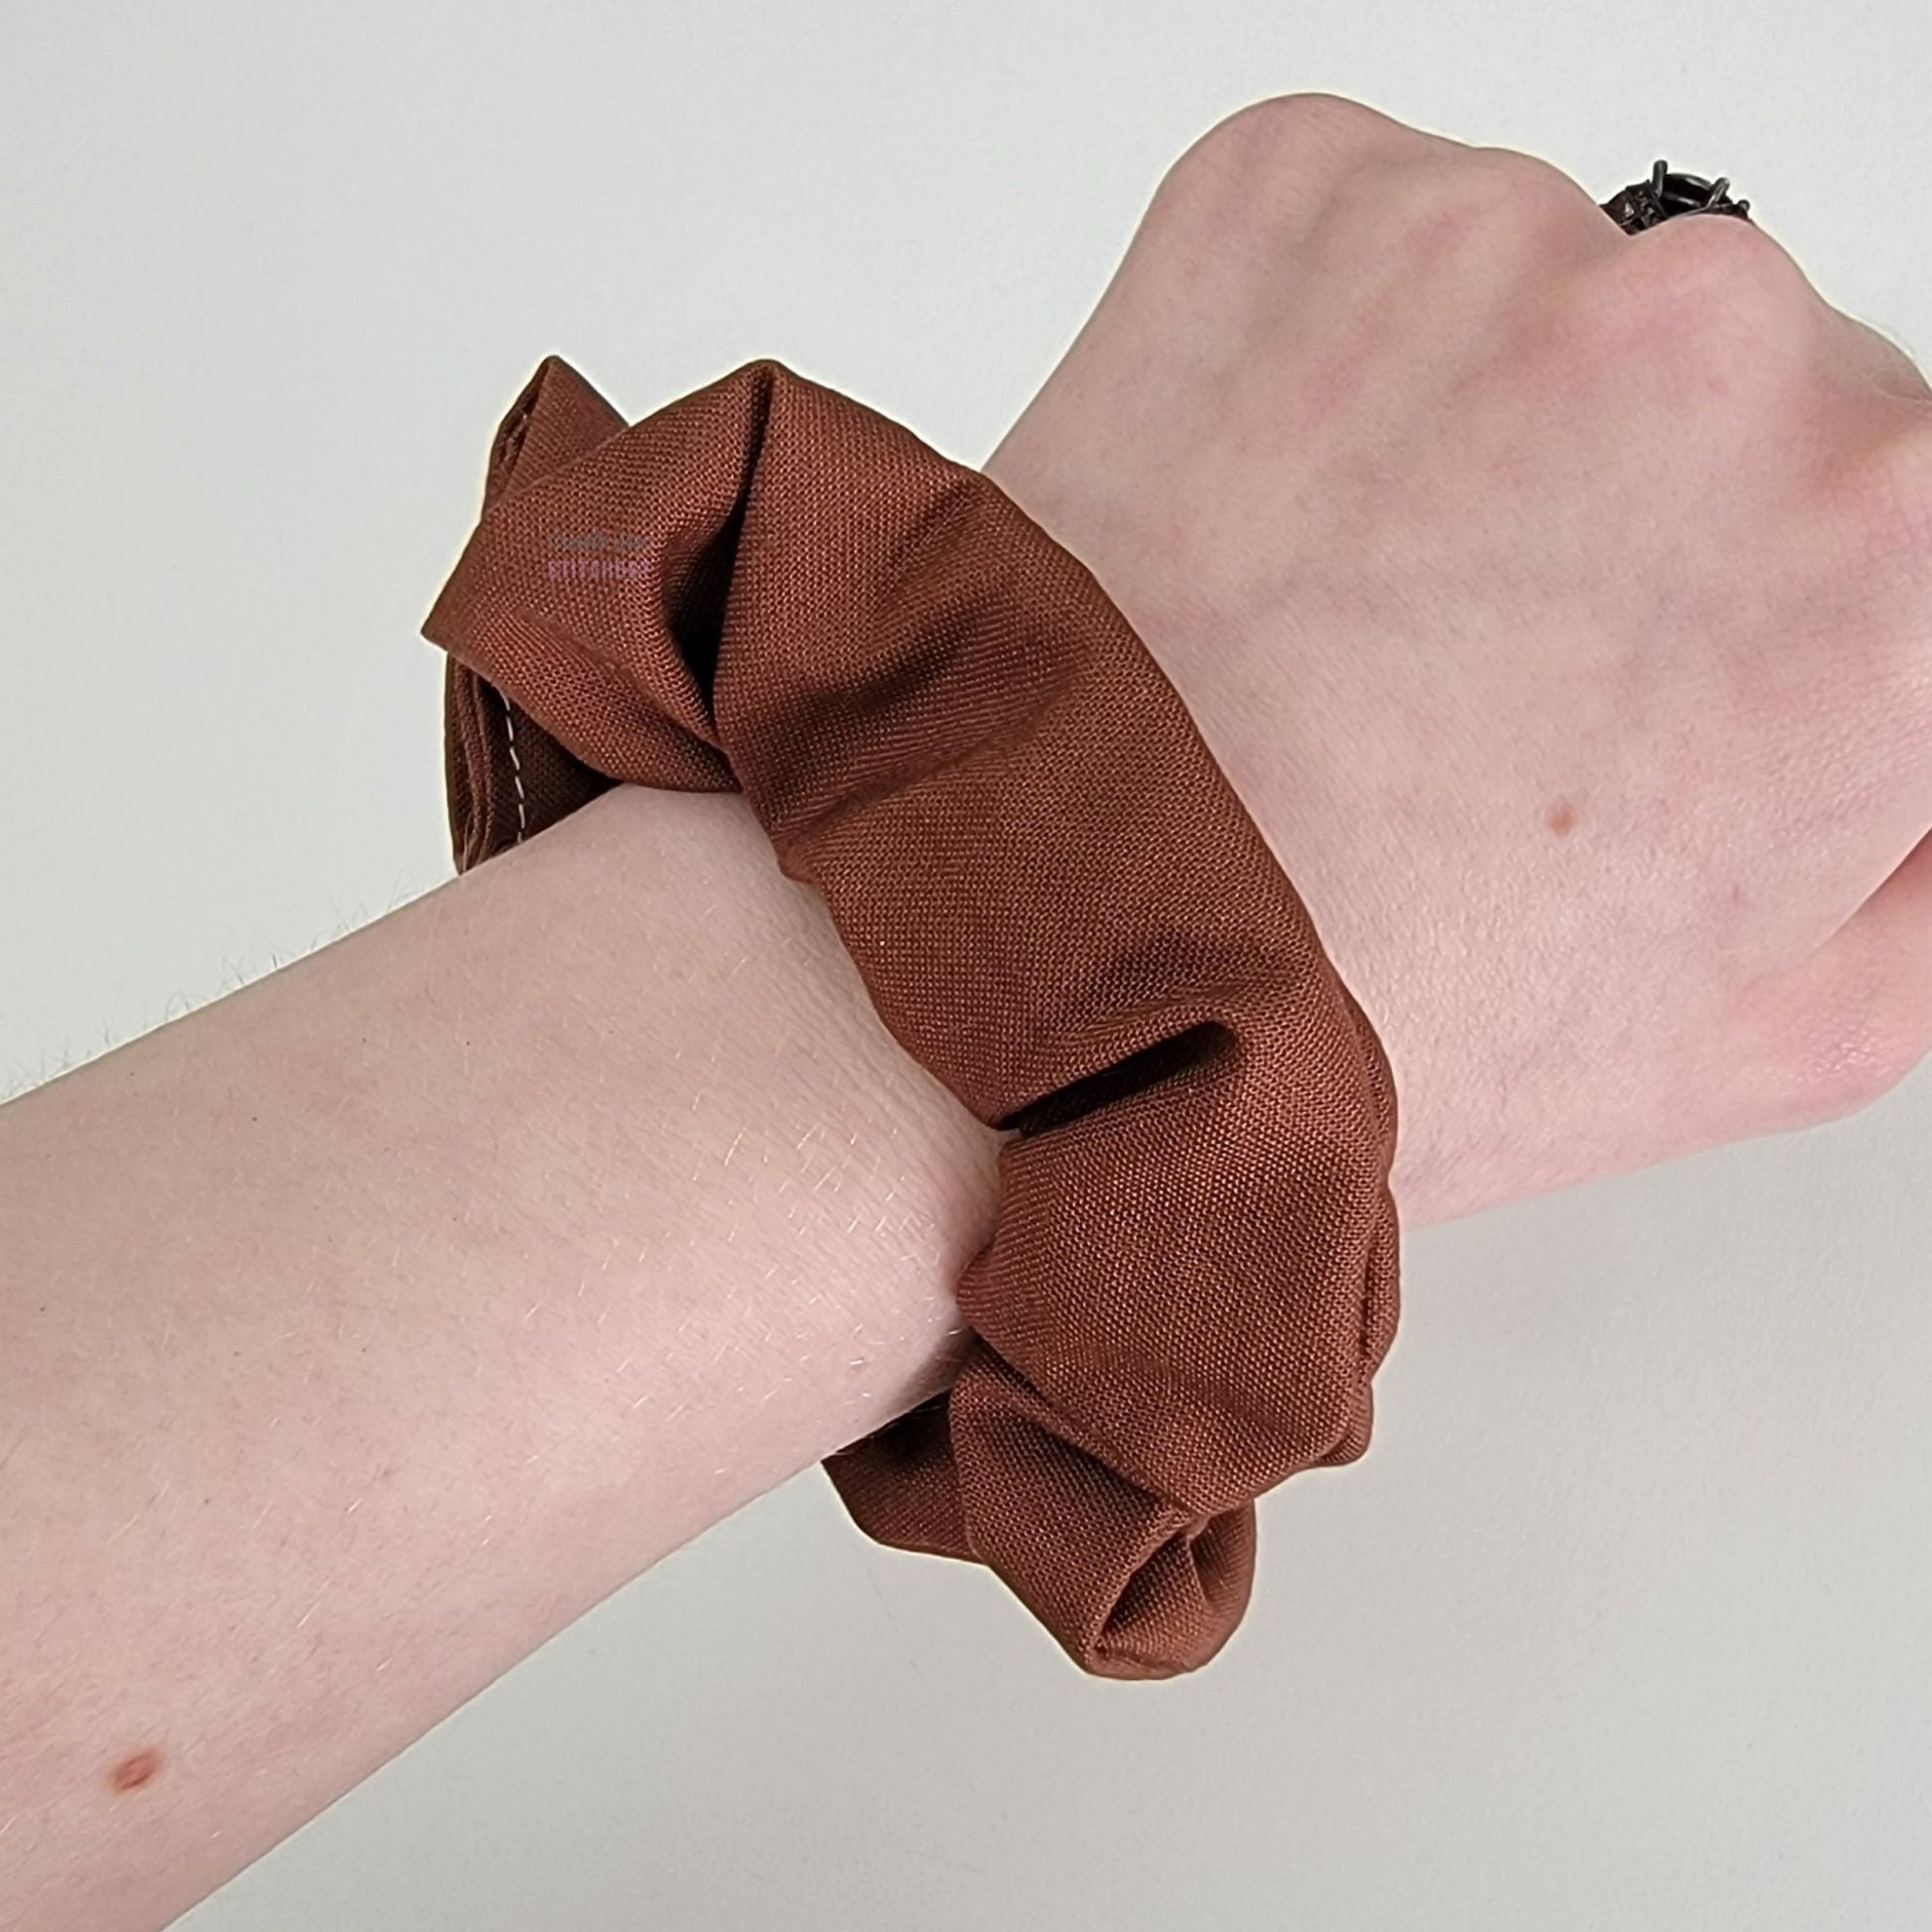 Solid chocolate brown scrunchie on my wrist.